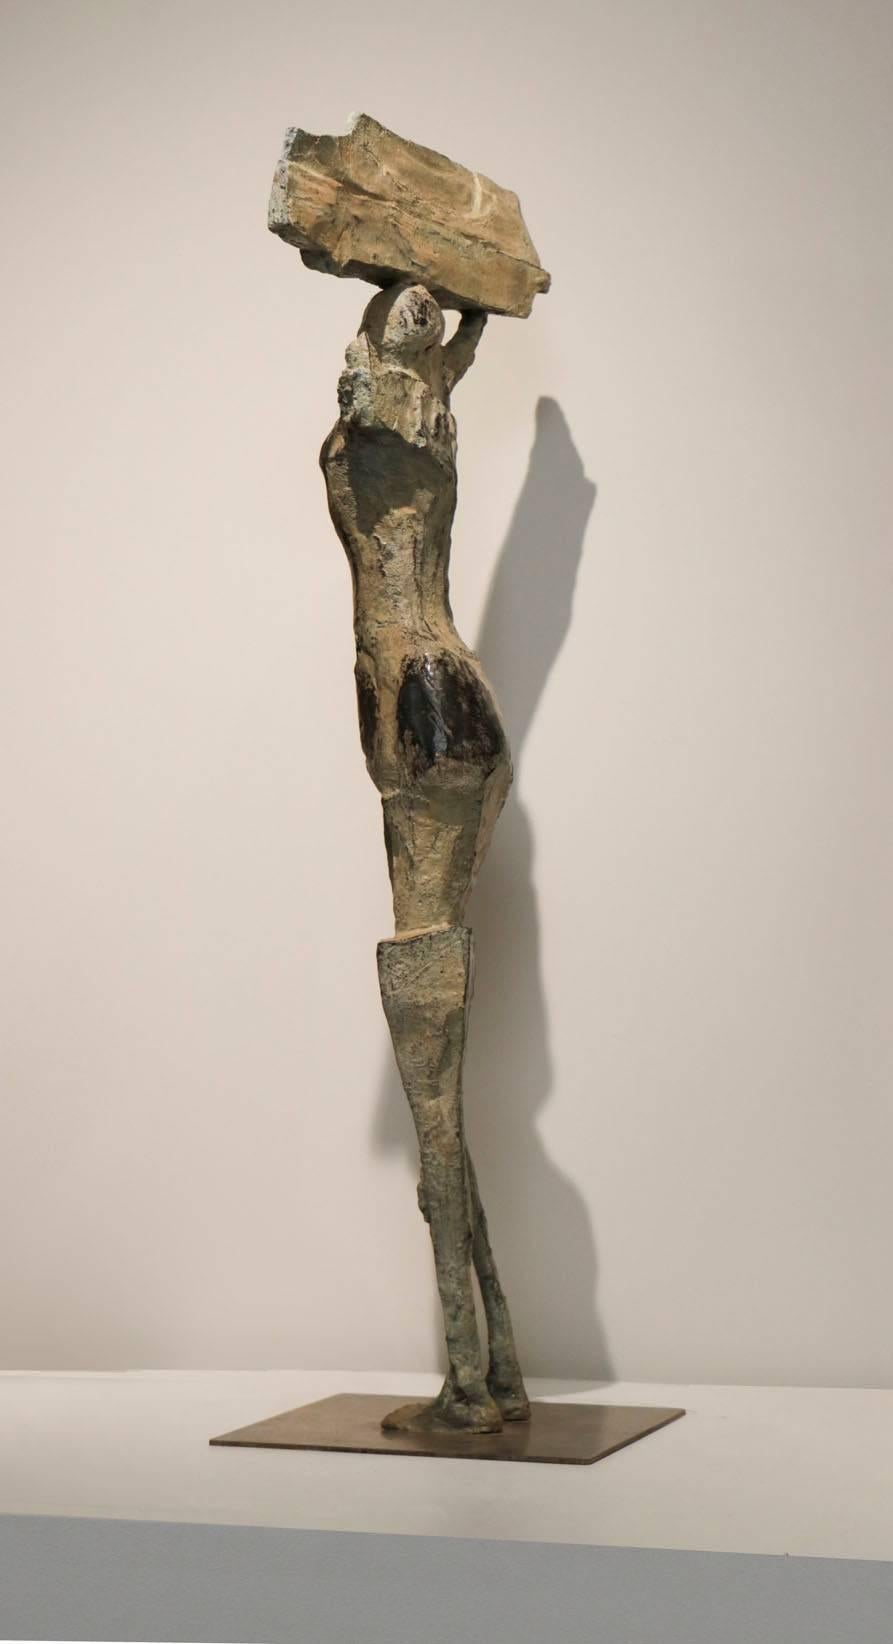 Carytid - Gold Figurative Sculpture by John Denning